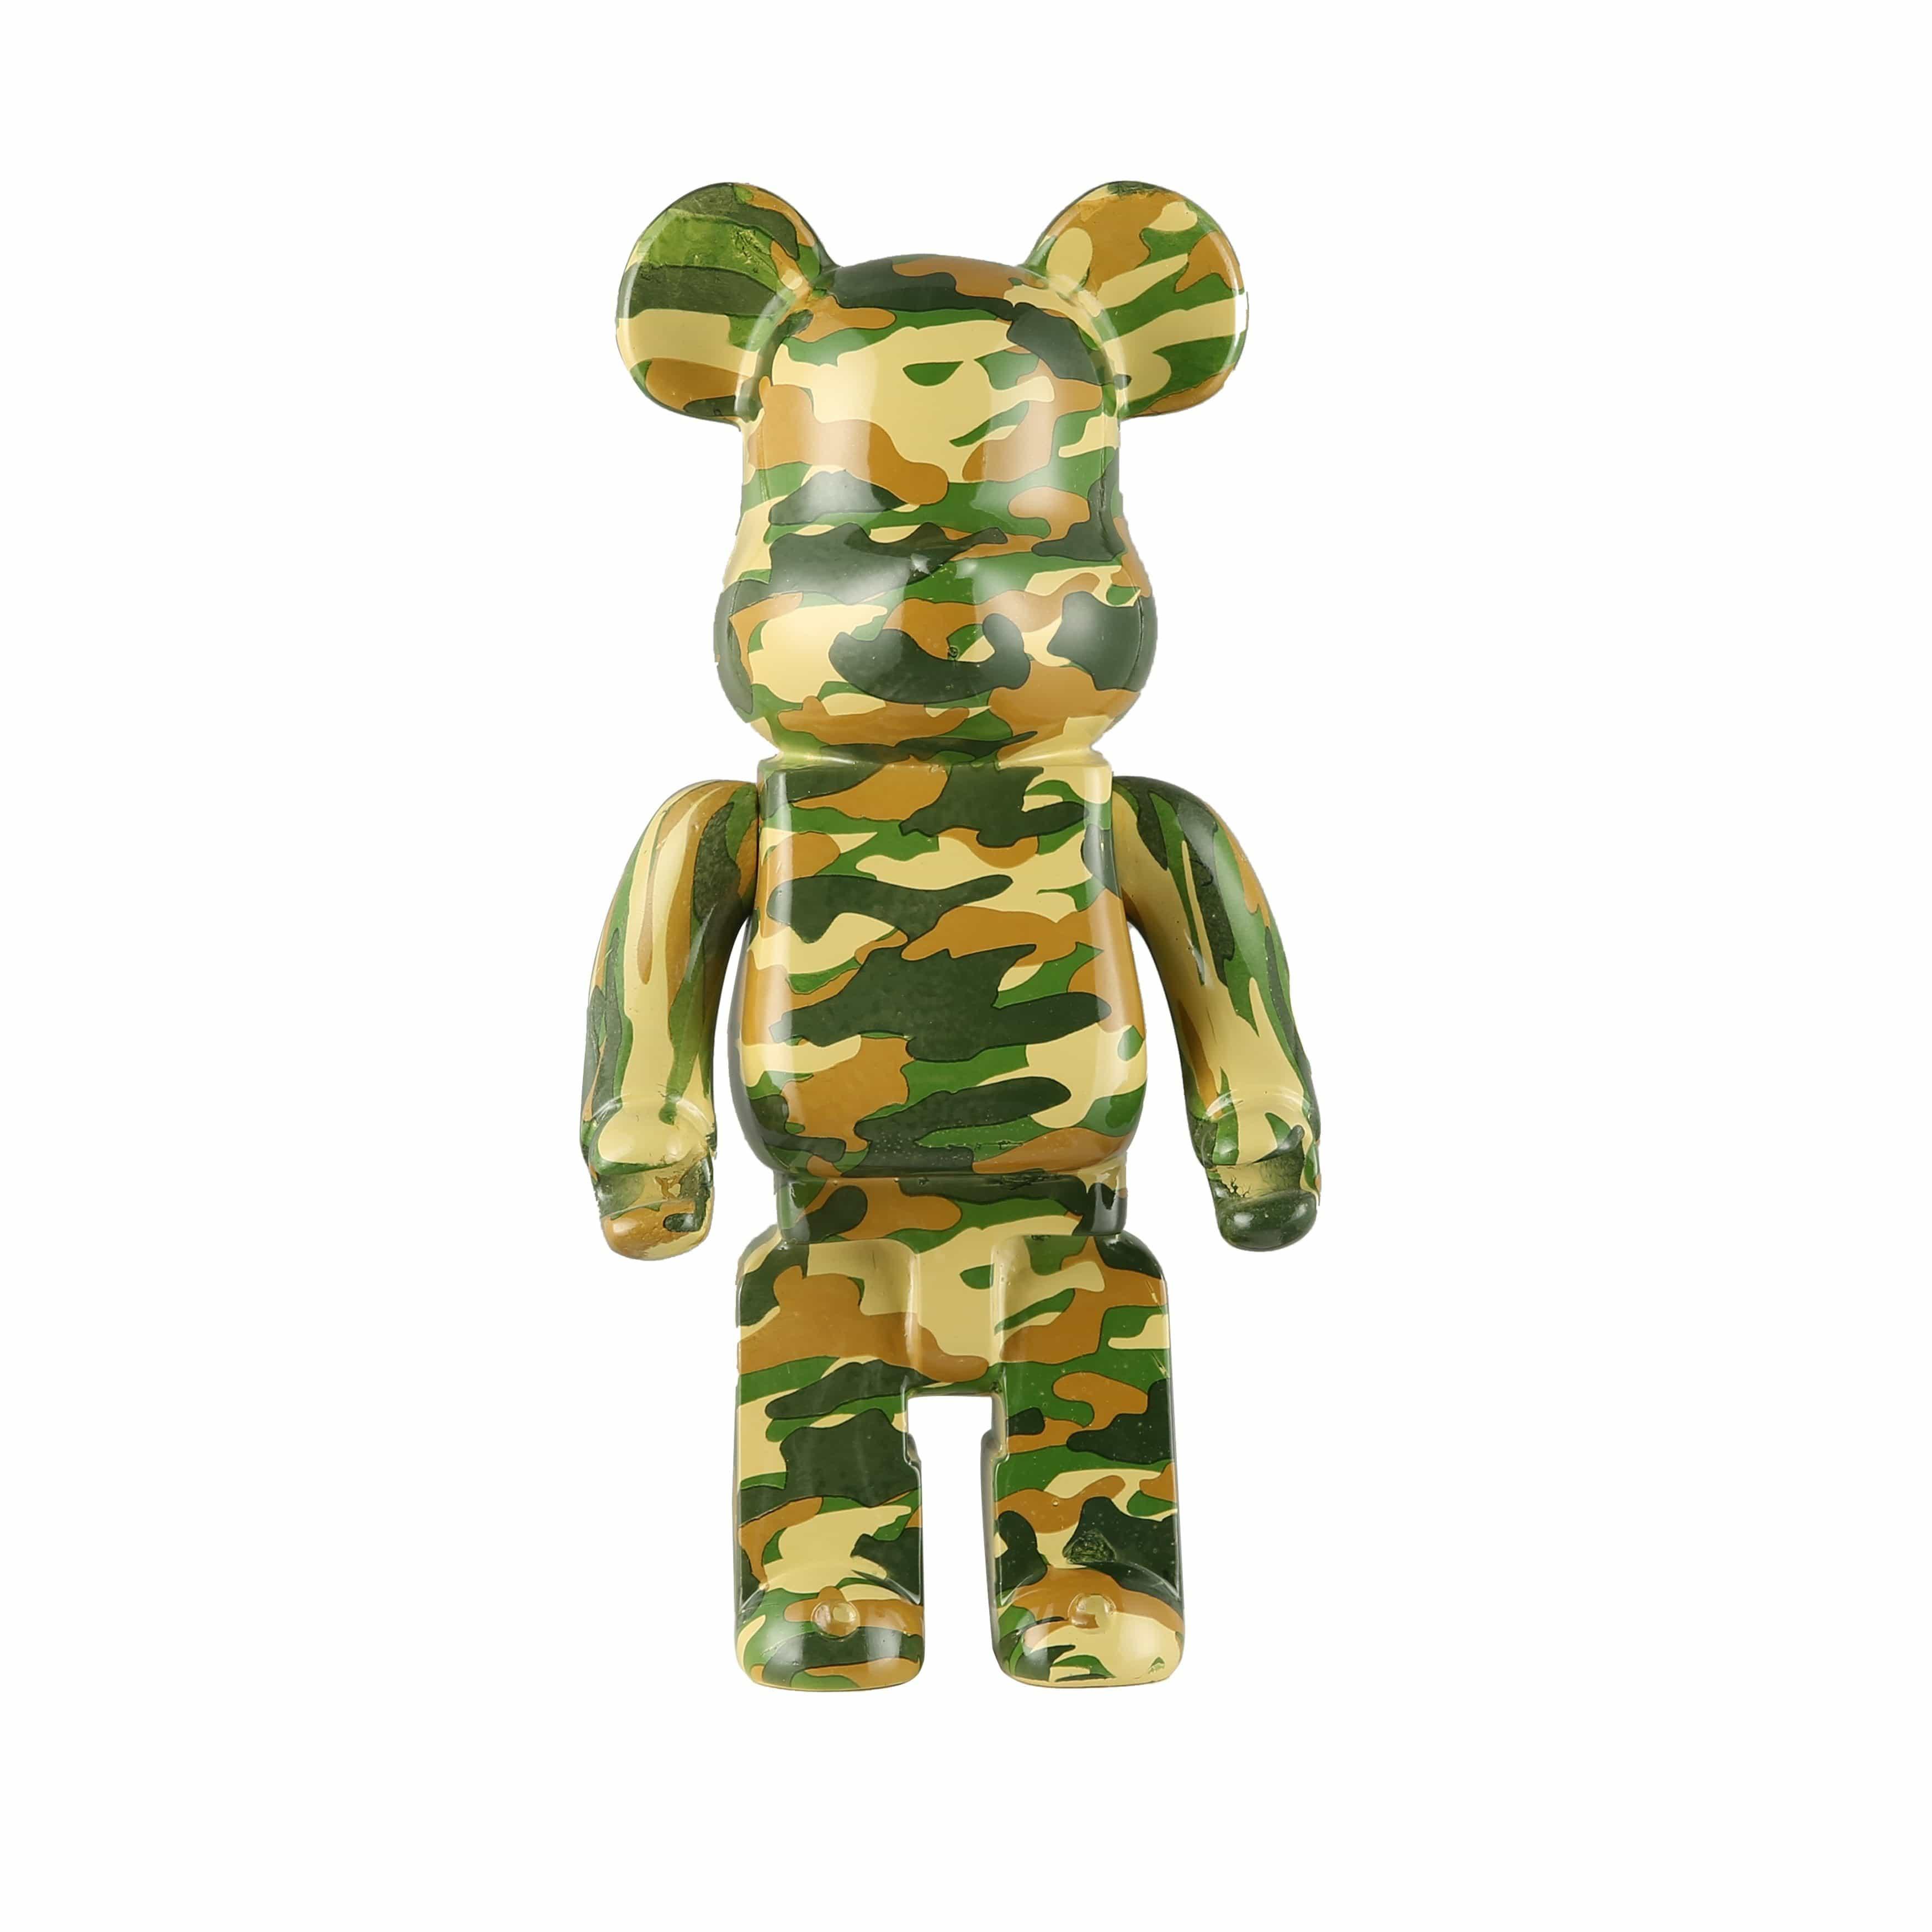 Shop 0 Camouflage Home Decoration 28Cm Bearbrick 400% Be@rbrick Games New Year's Gift Tide Play Model Plating Resin Electronic Games Kids Toys Mademoiselle Home Decor